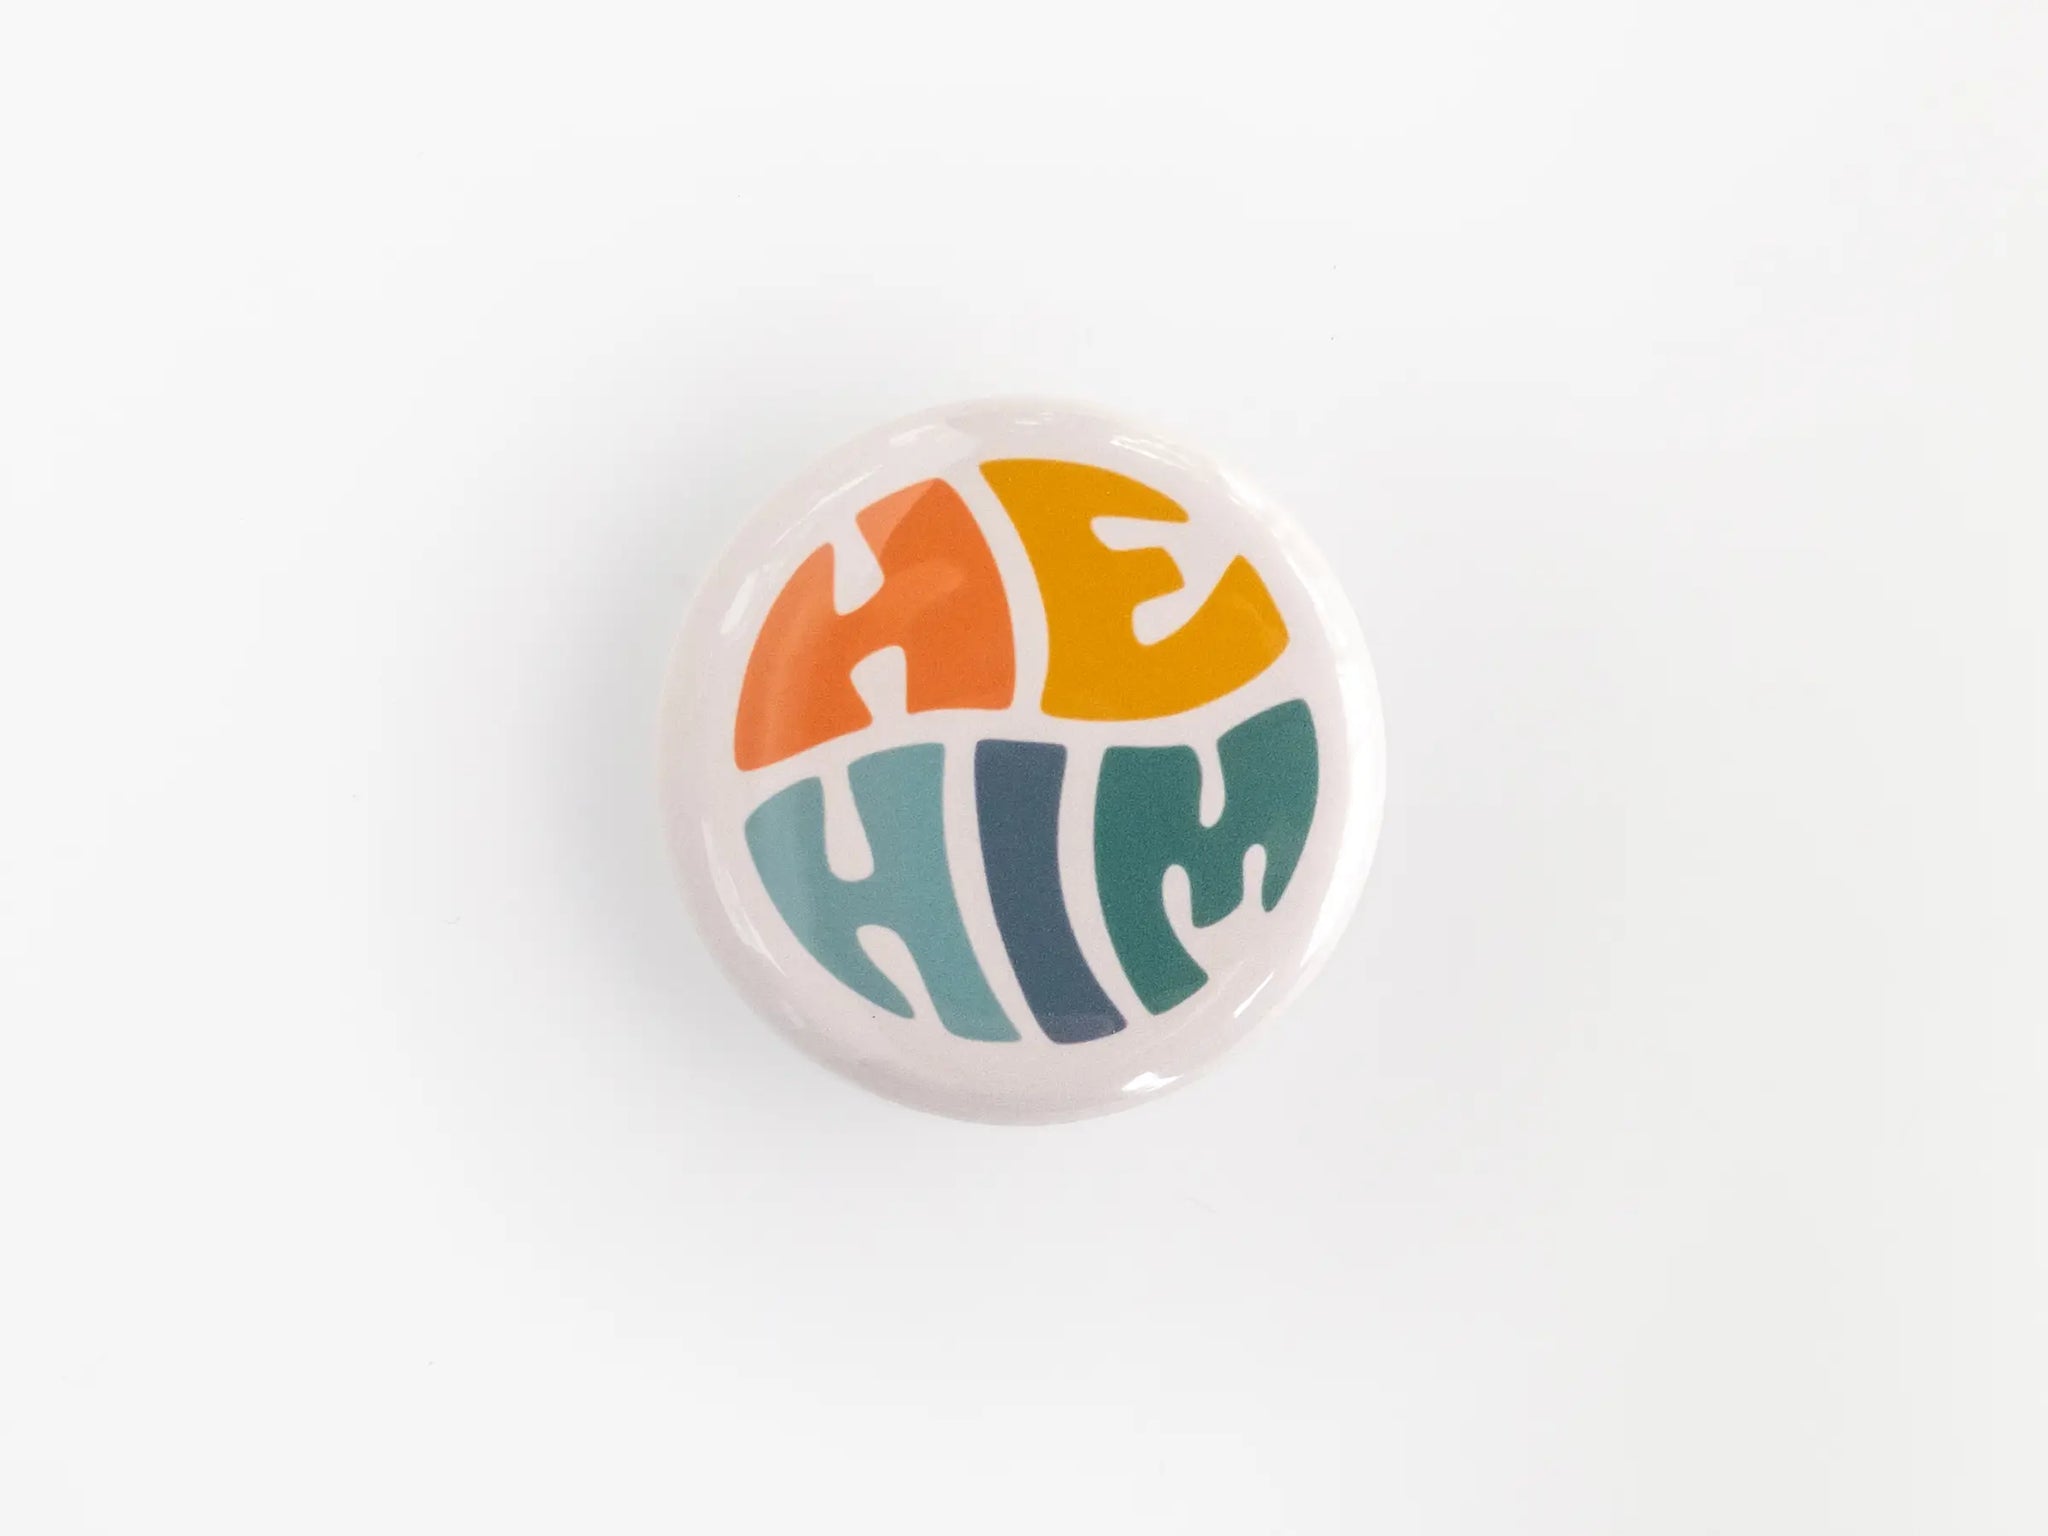 A 1.25” button with the pronouns “he” and “him” in multicolored lettering